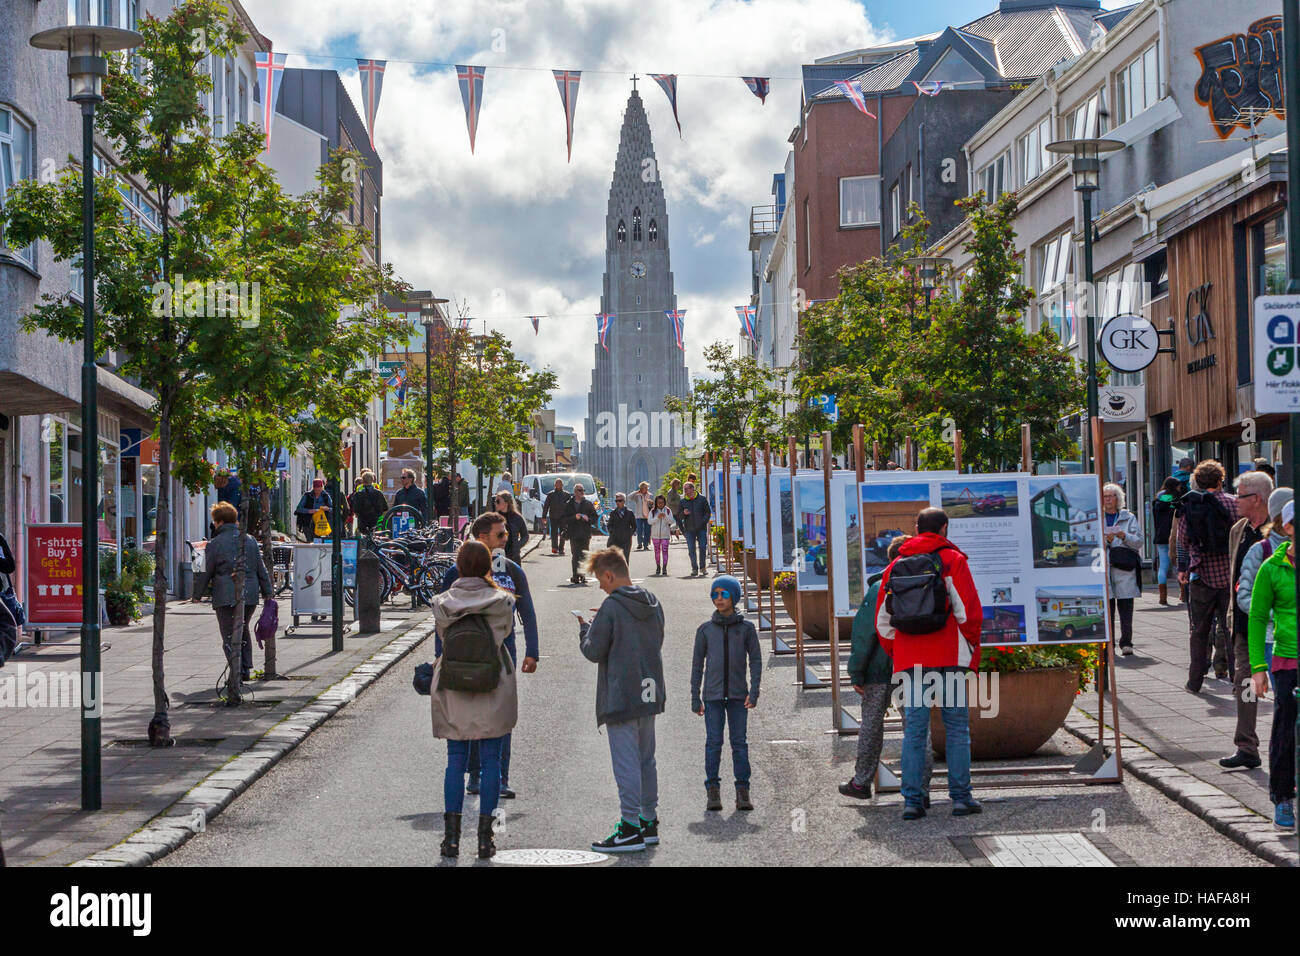 People, tourists walking in the shopping district in Reykjavik, Iceland and the Lutheran Church Hallgrimskirkja is seen. Stock Photo